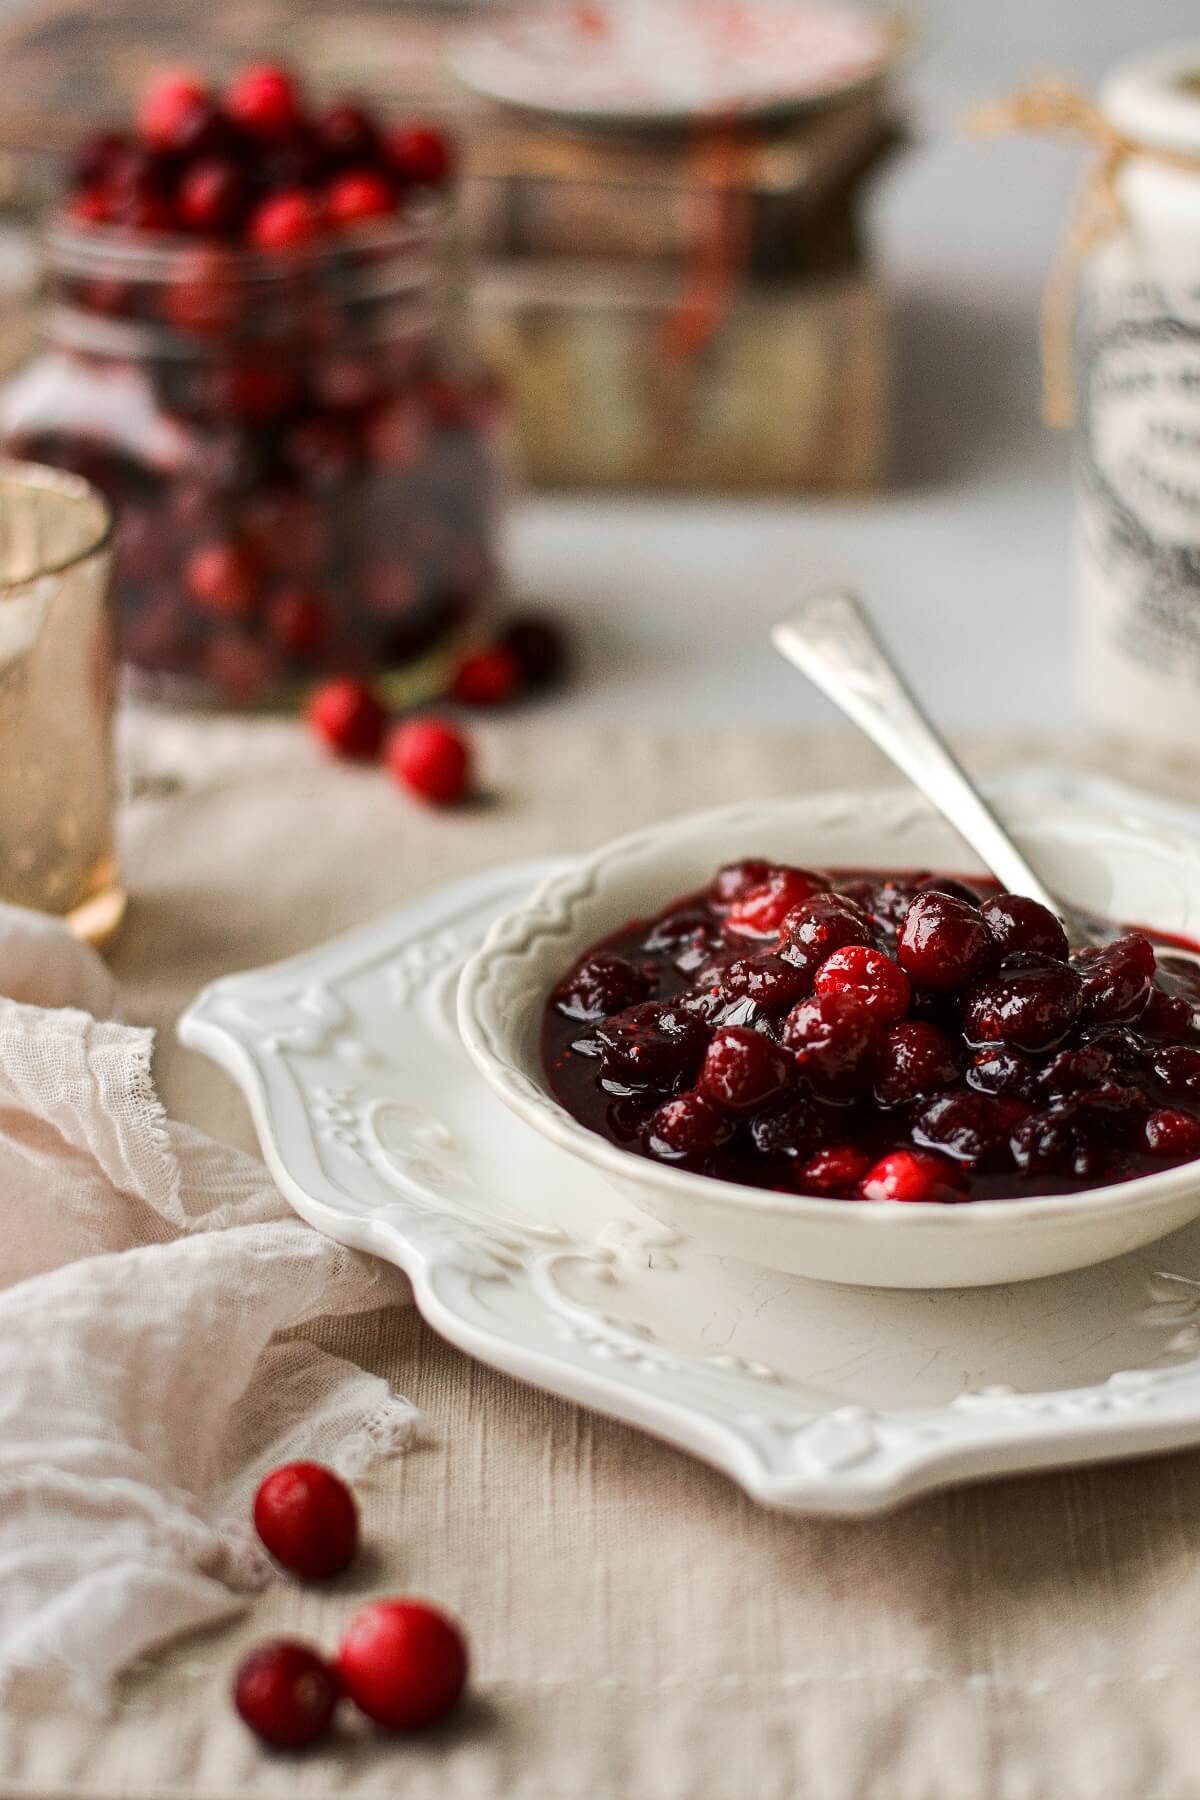 Homemade cranberry sauce in a white bowl, with a jar of cranberries in the background.